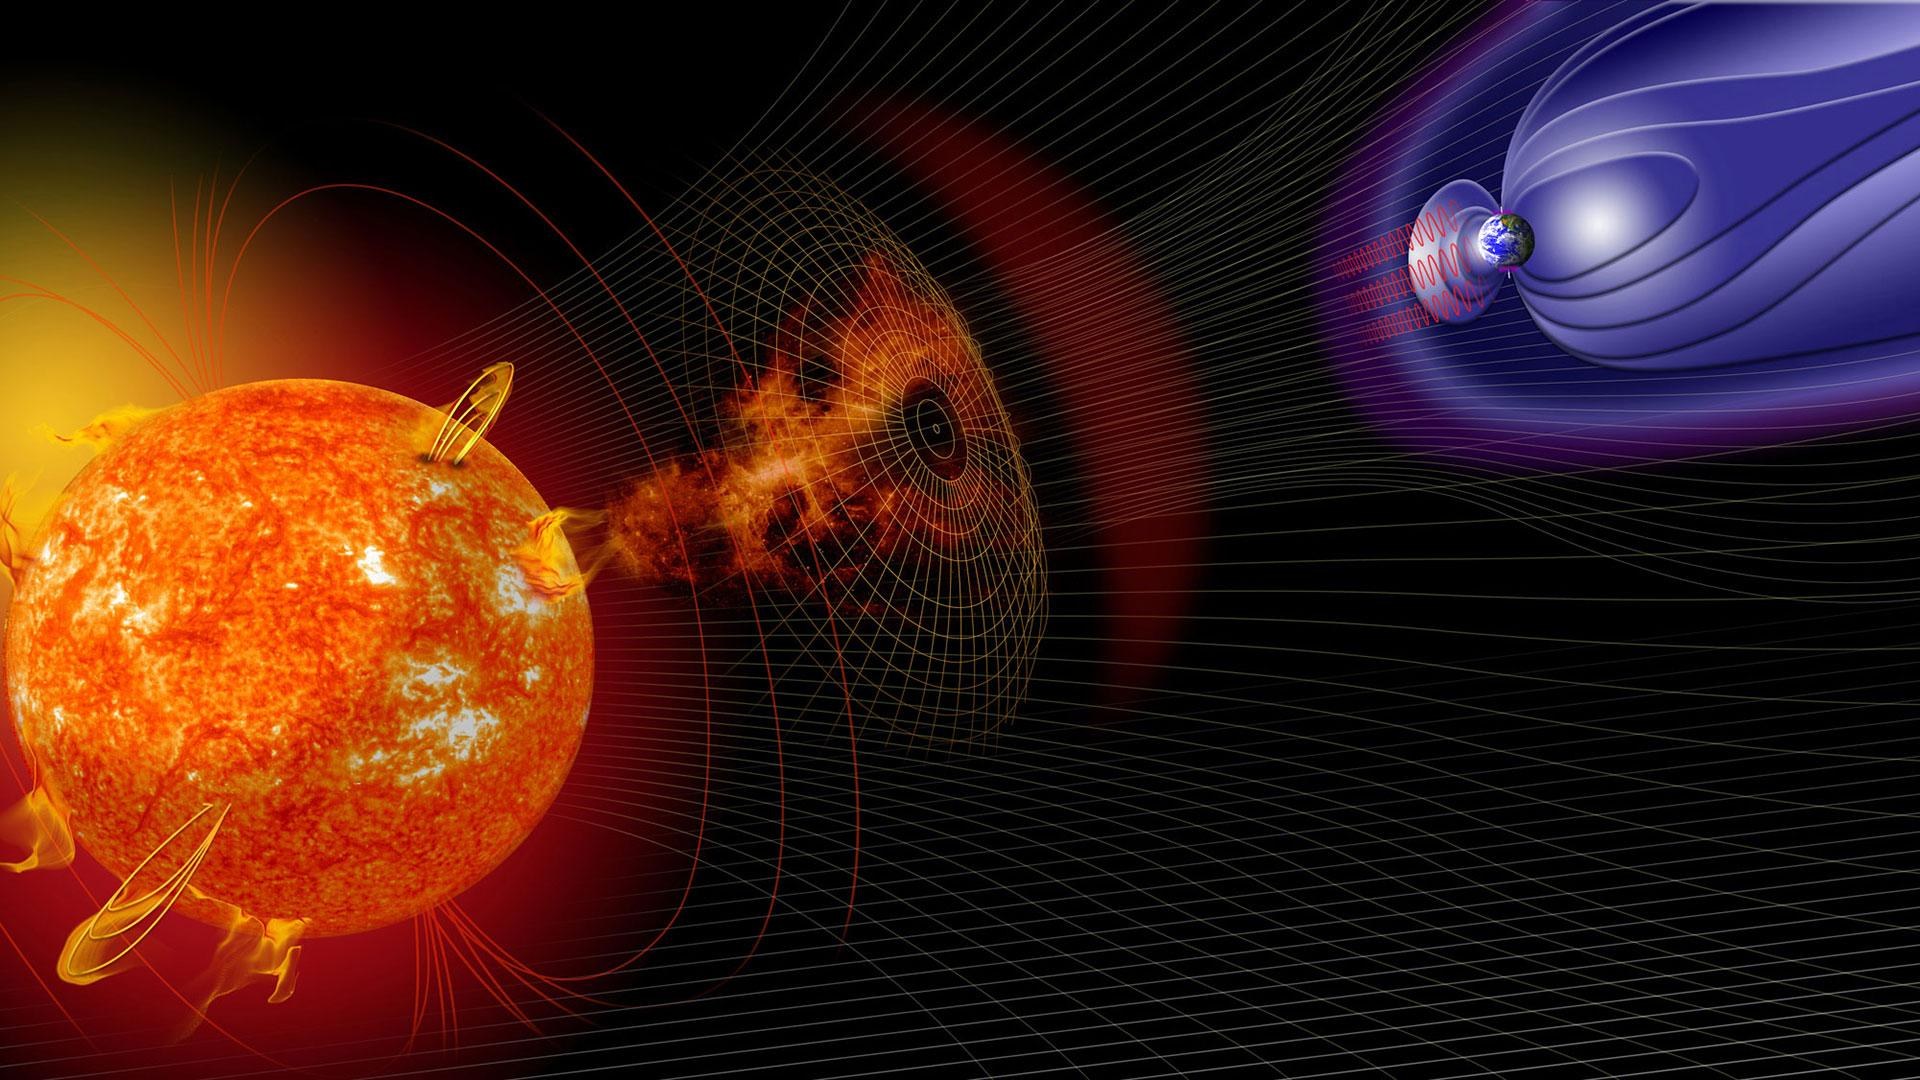 Space weather influences the Earth’s magnetic field